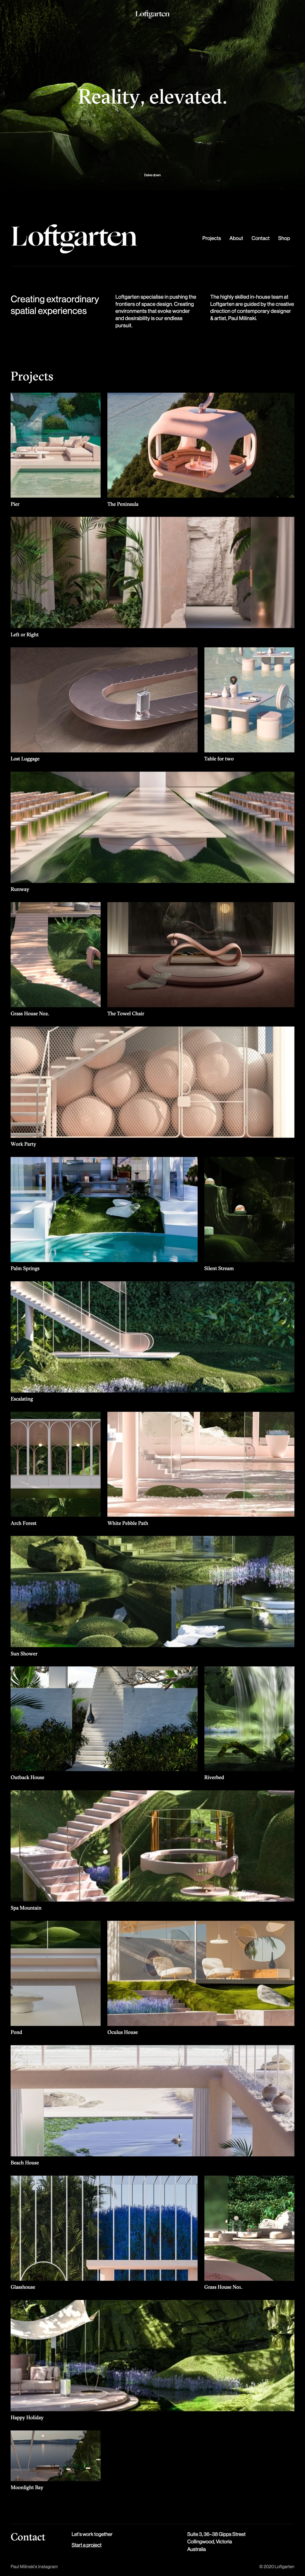 Loftgarten Landing Page Example: Loftgarten specialises in creating high-end 3D imagery and video for brands that want to transcend above physical restraints and showcase their products and services in a modern and impactful fashion.